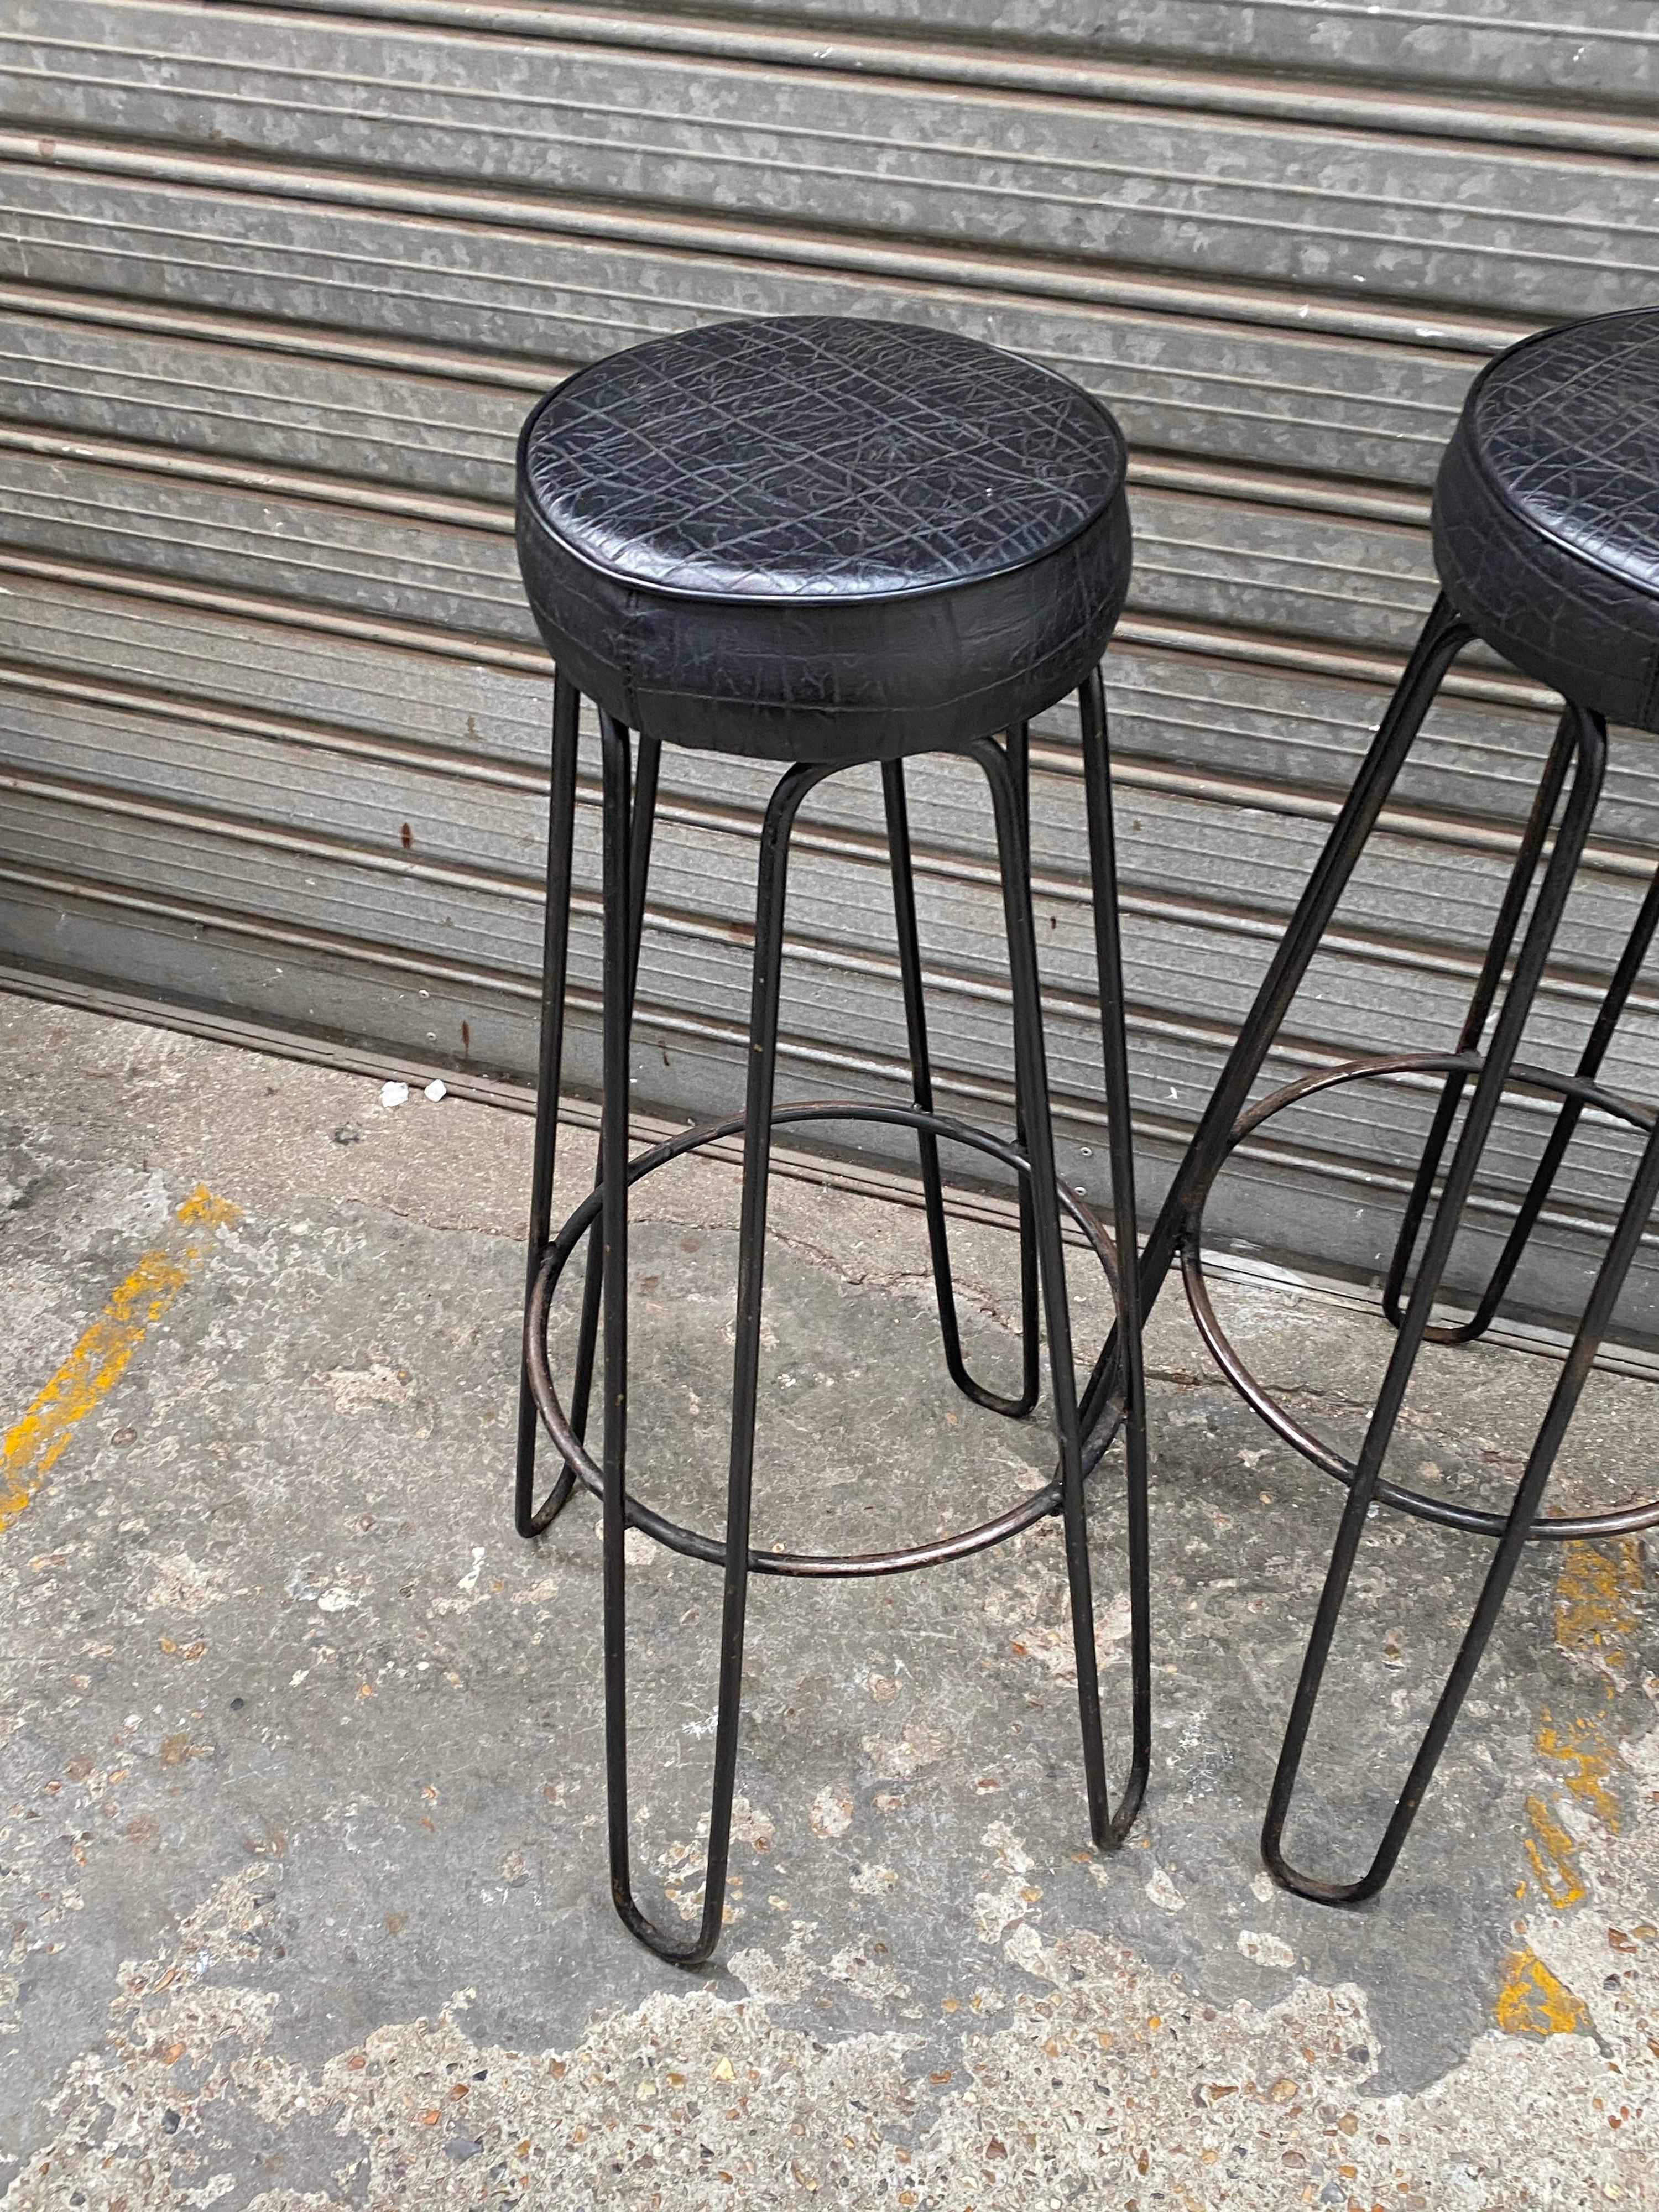 Three metal stools by Raoul Guys, France, 1950.